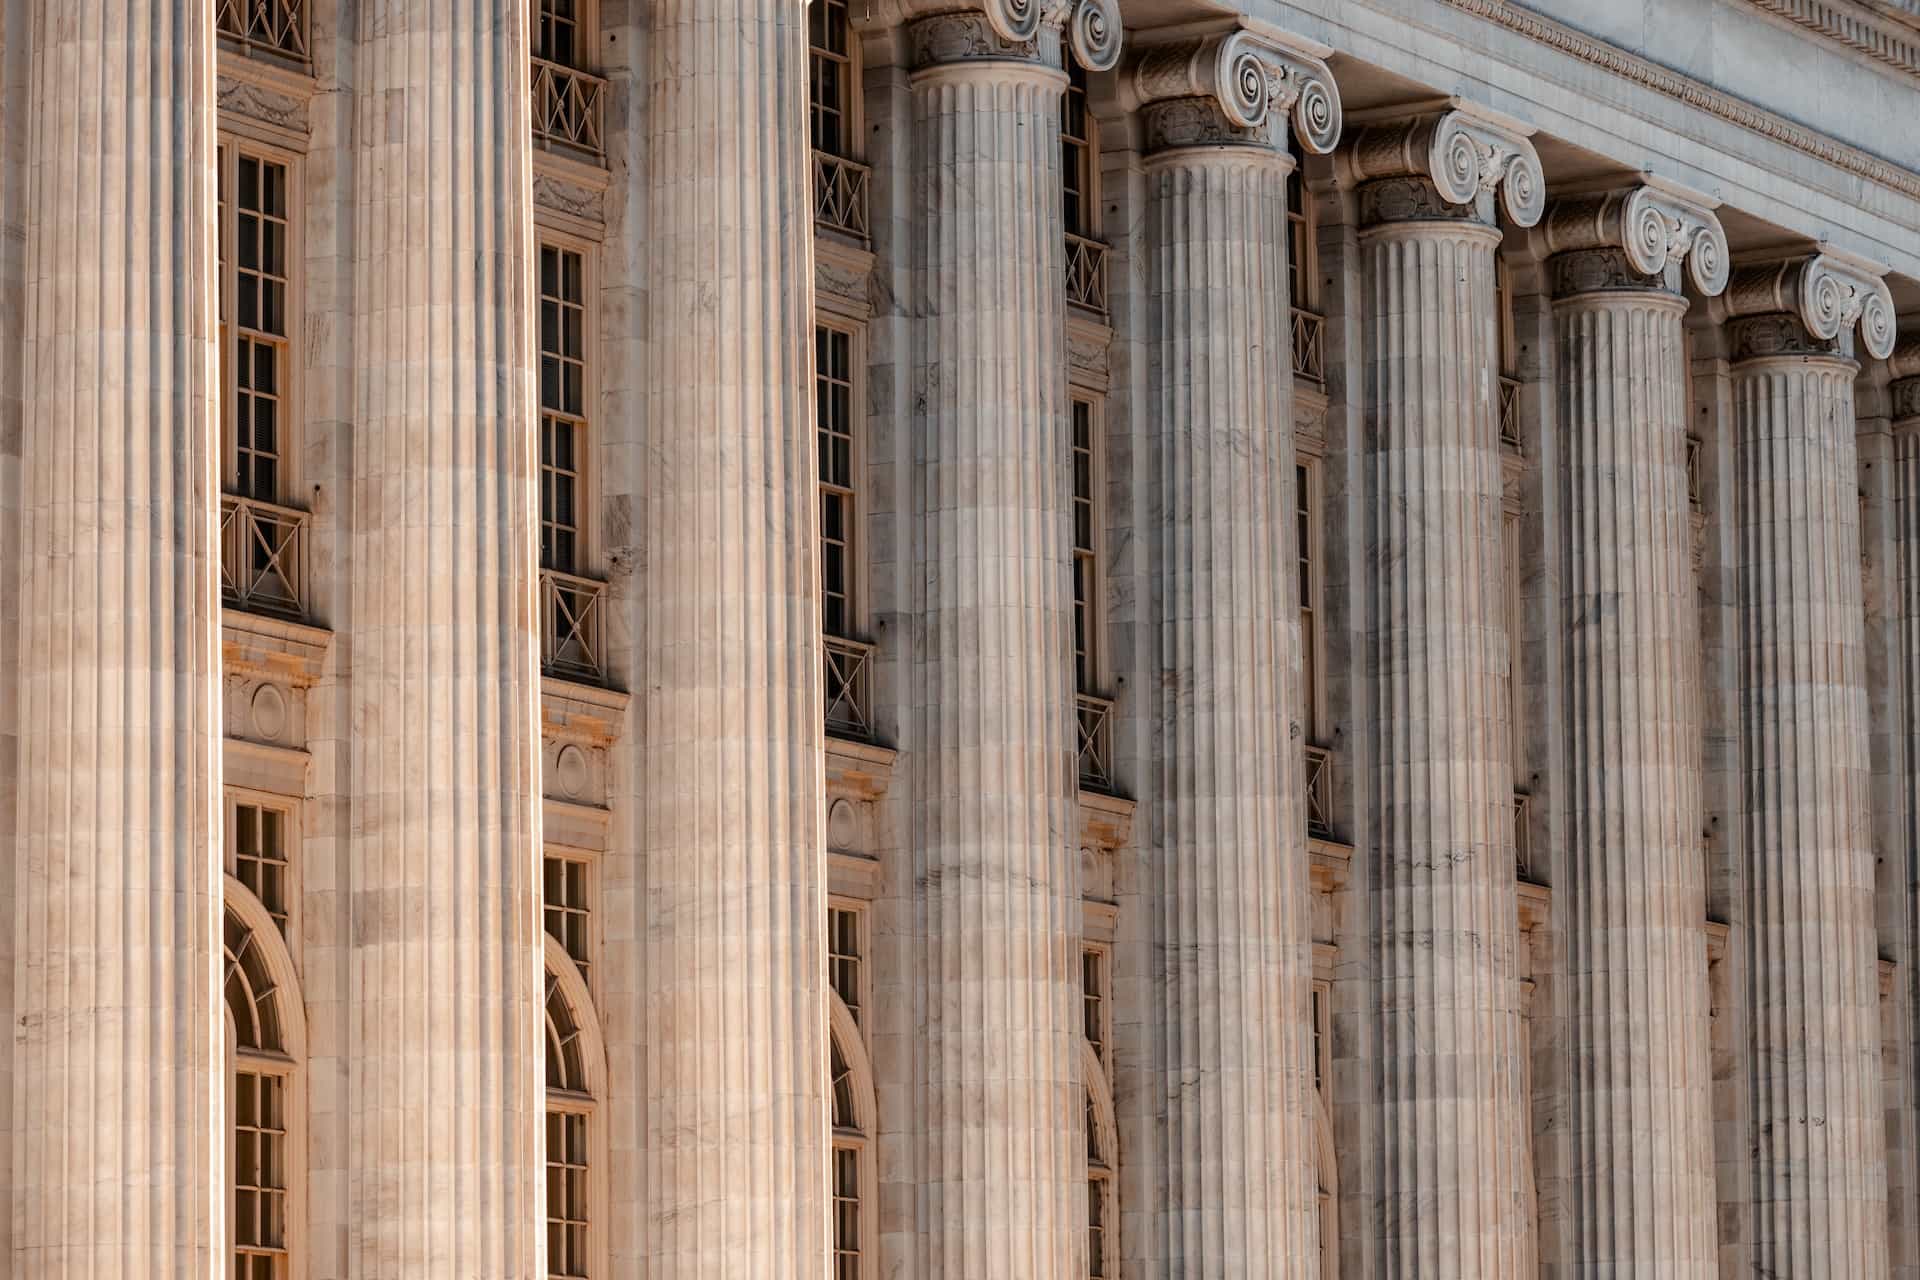 The face of a large building with many columns.